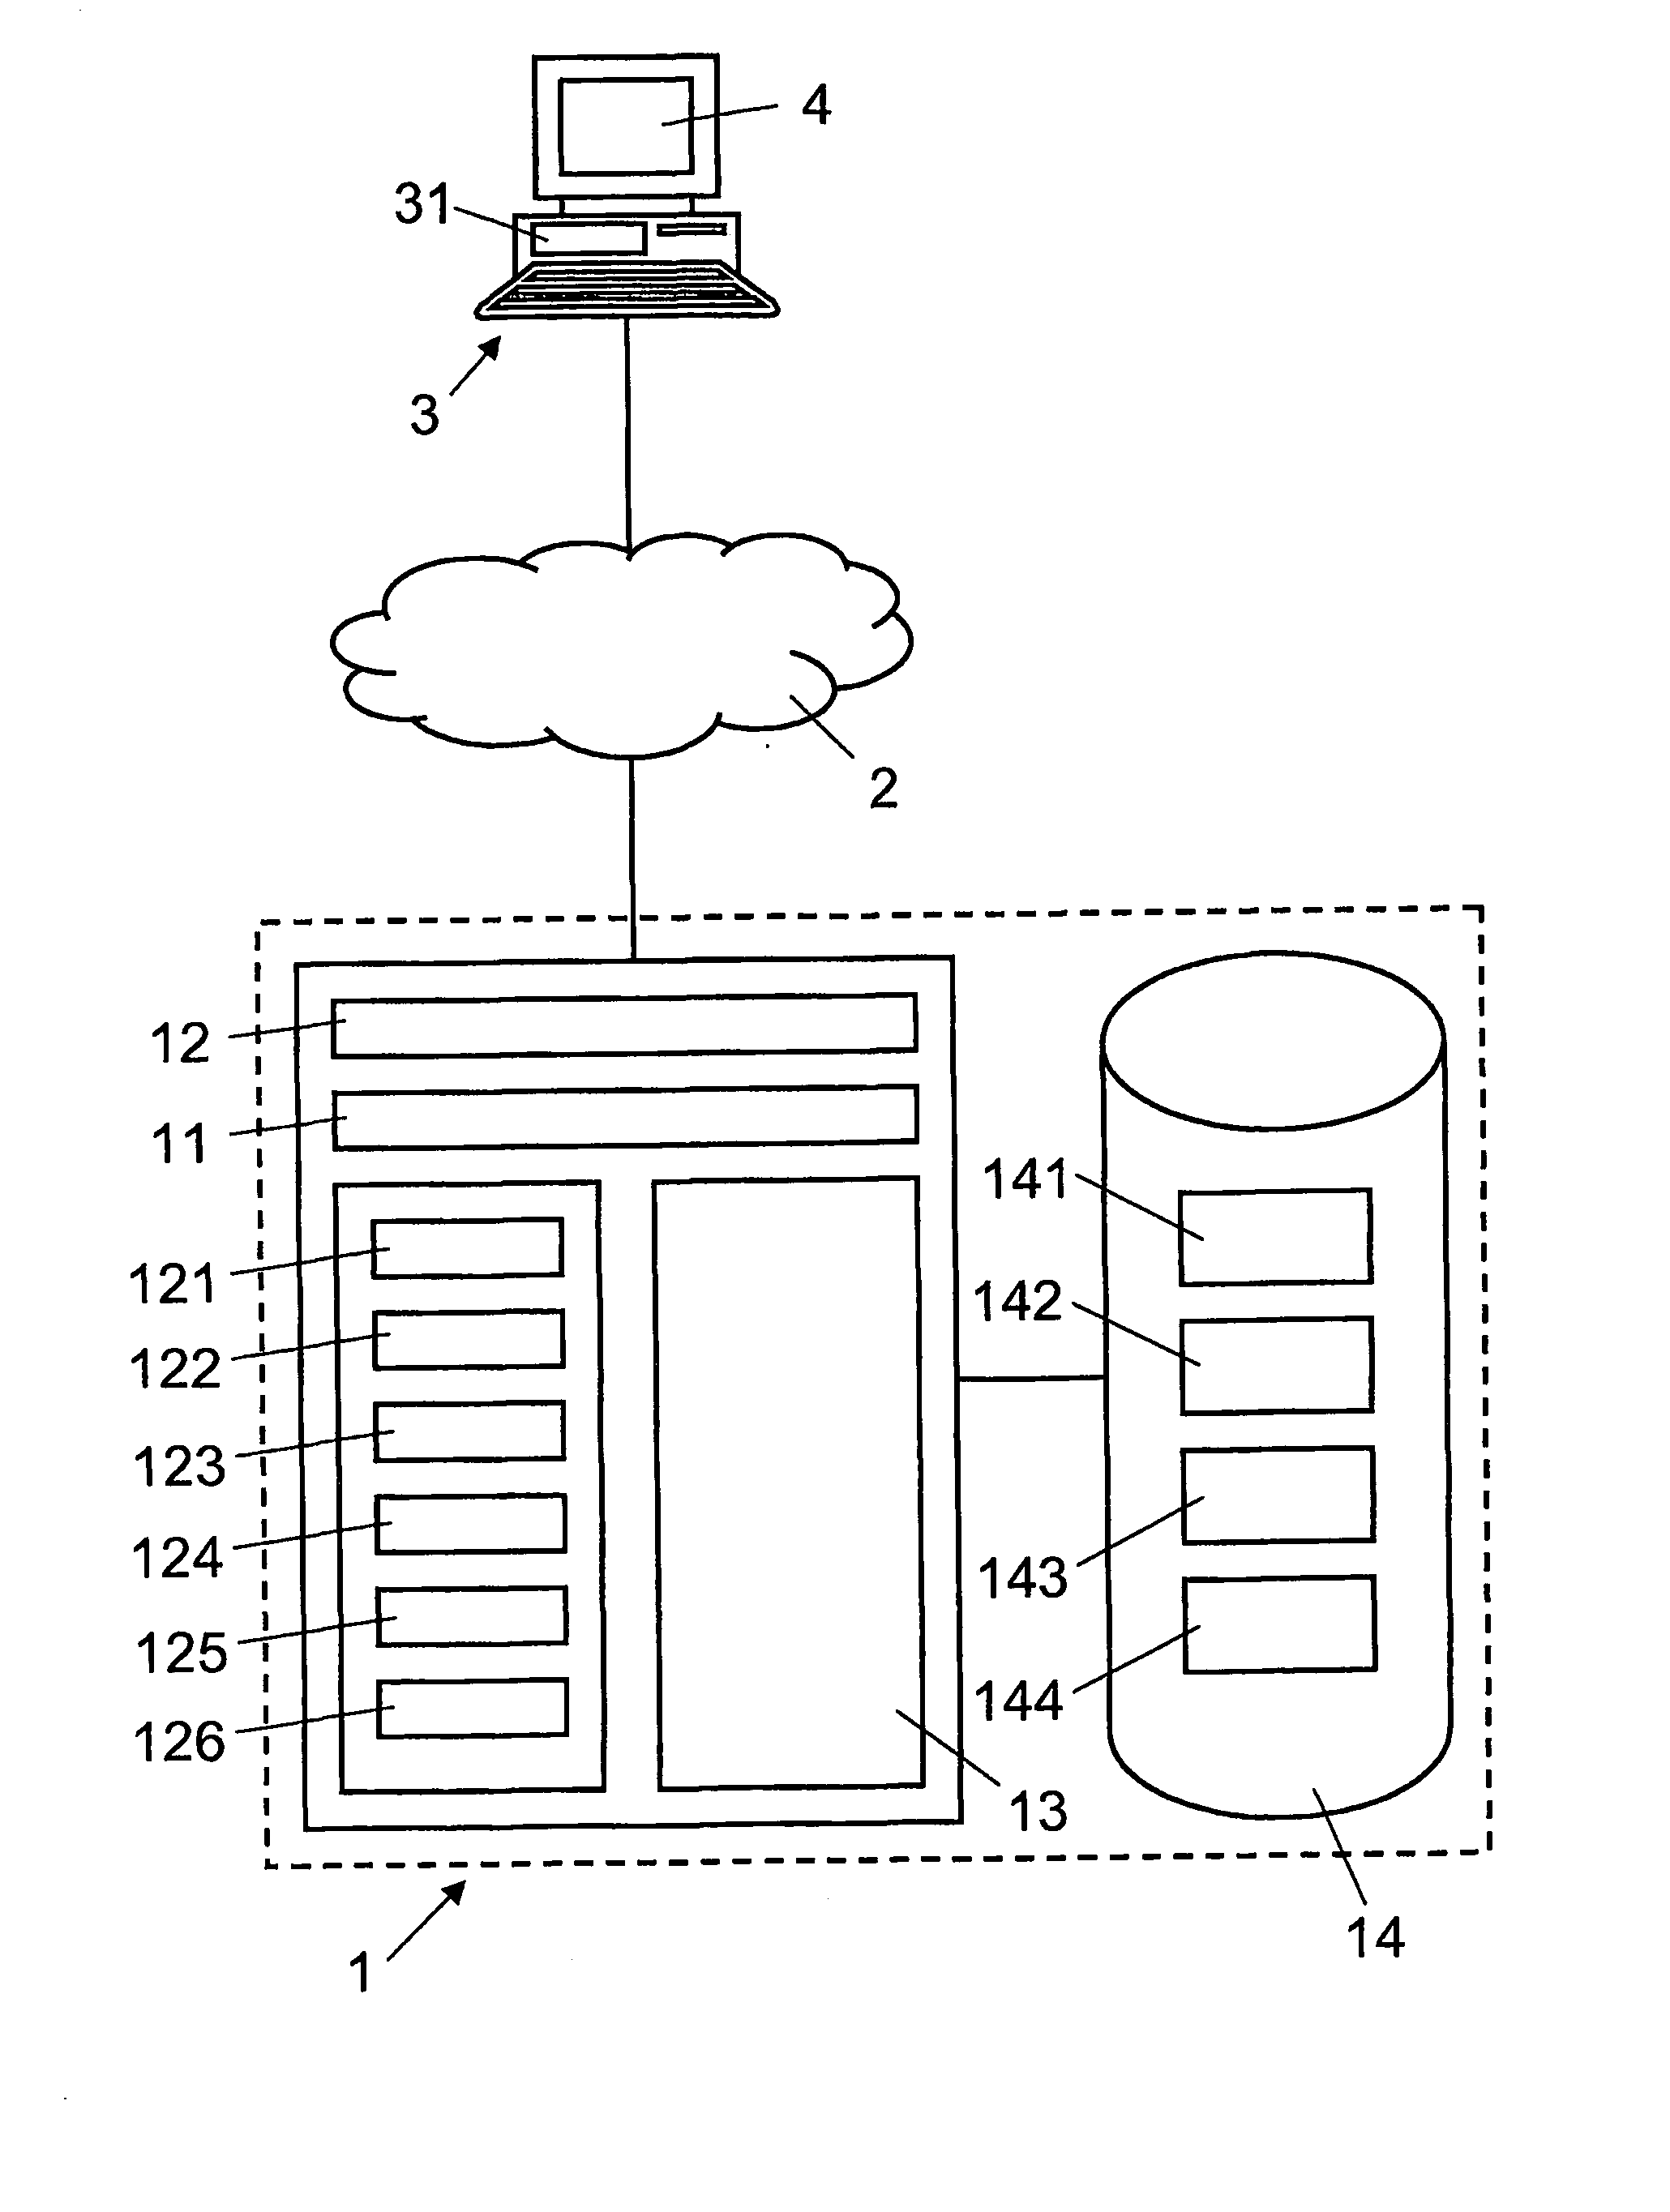 Computer-based data processing system and method of processing data objects